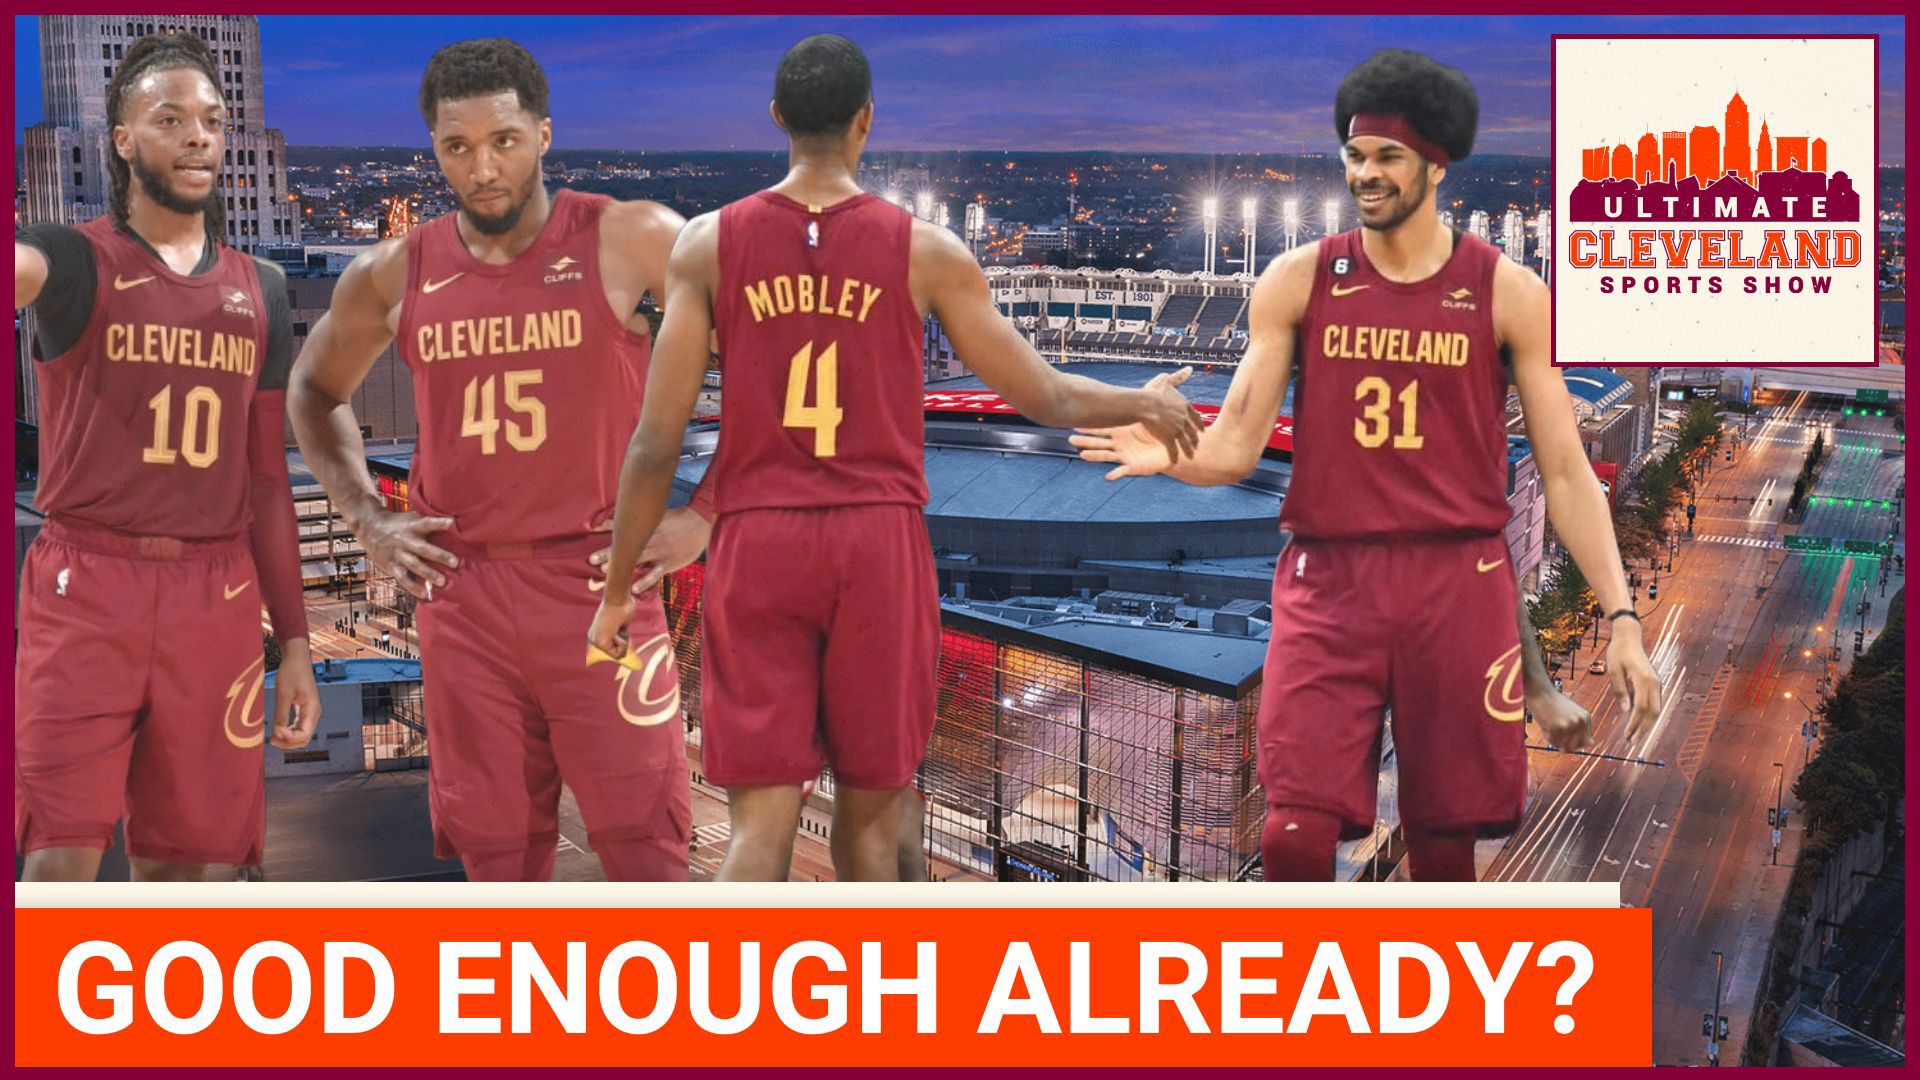 Are the Cleveland Cavaliers good enough with their "core four" or do they need to make some changes and add some pieces?